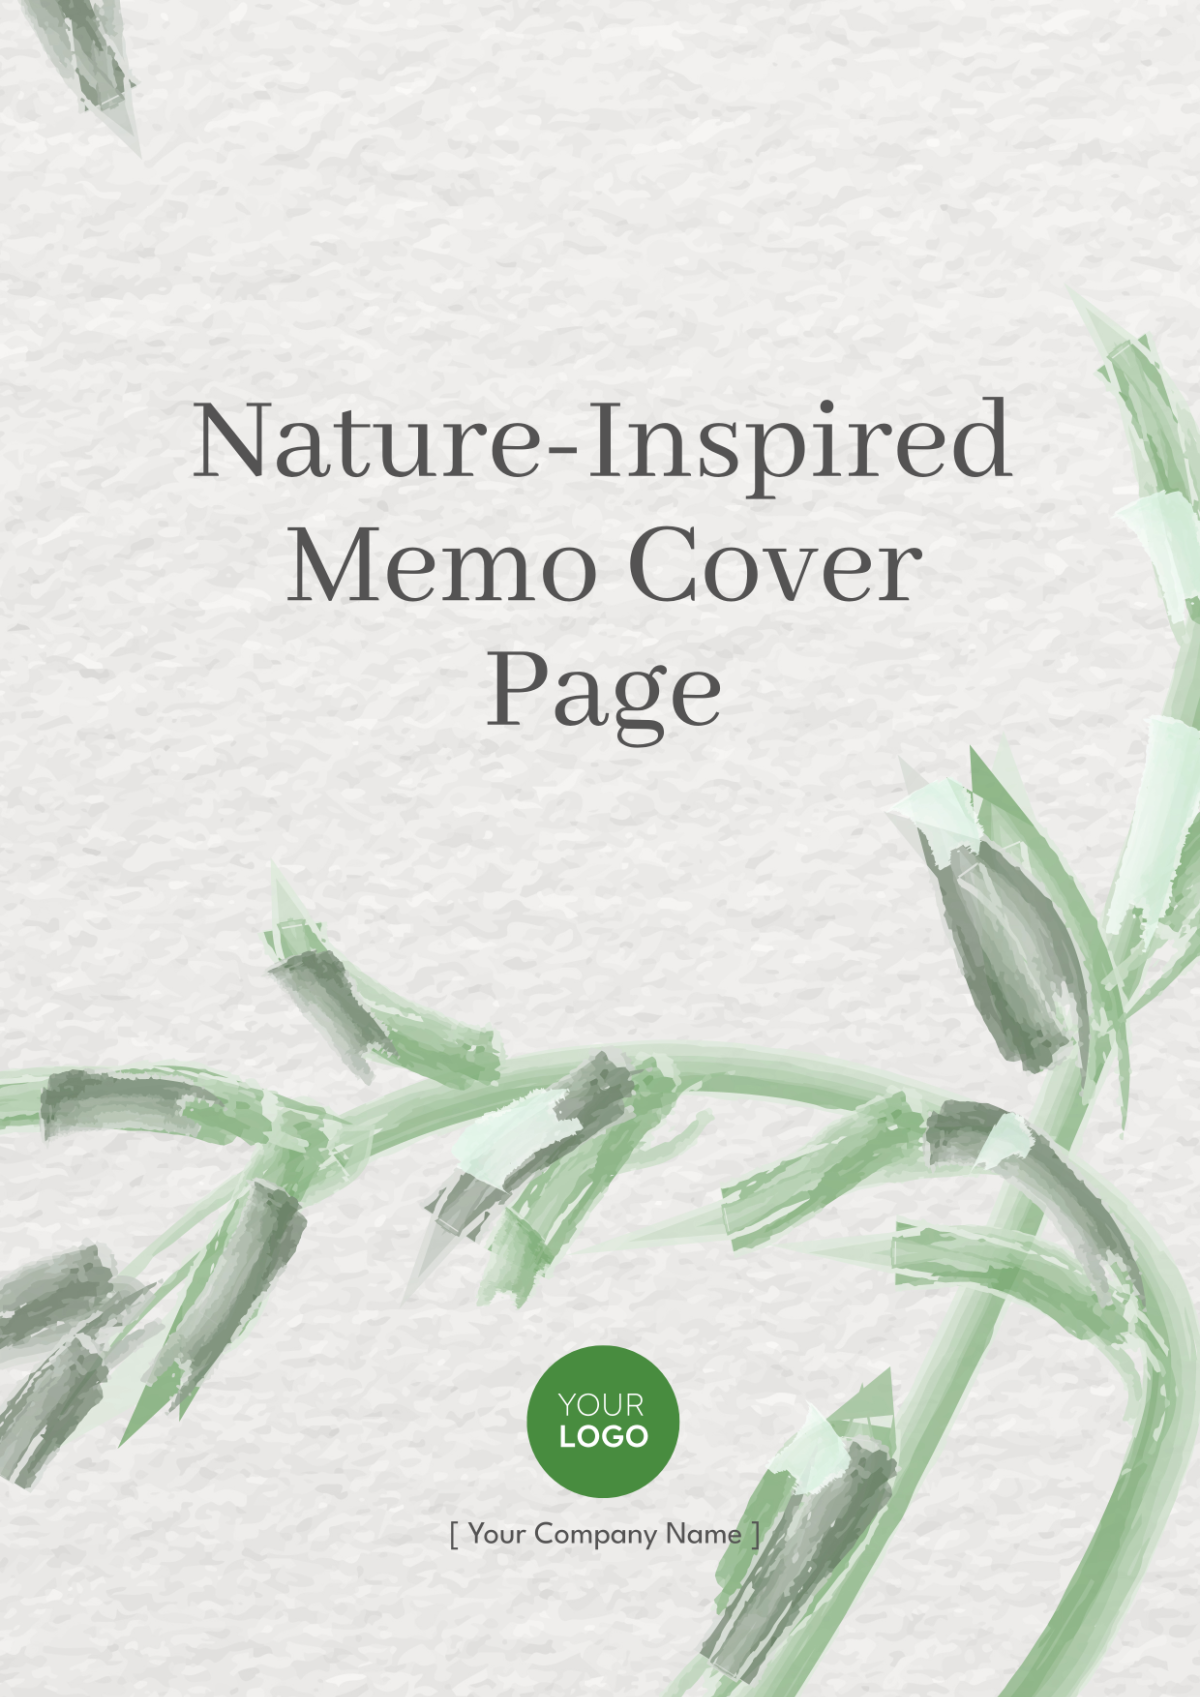 Nature-Inspired Memo Cover Page